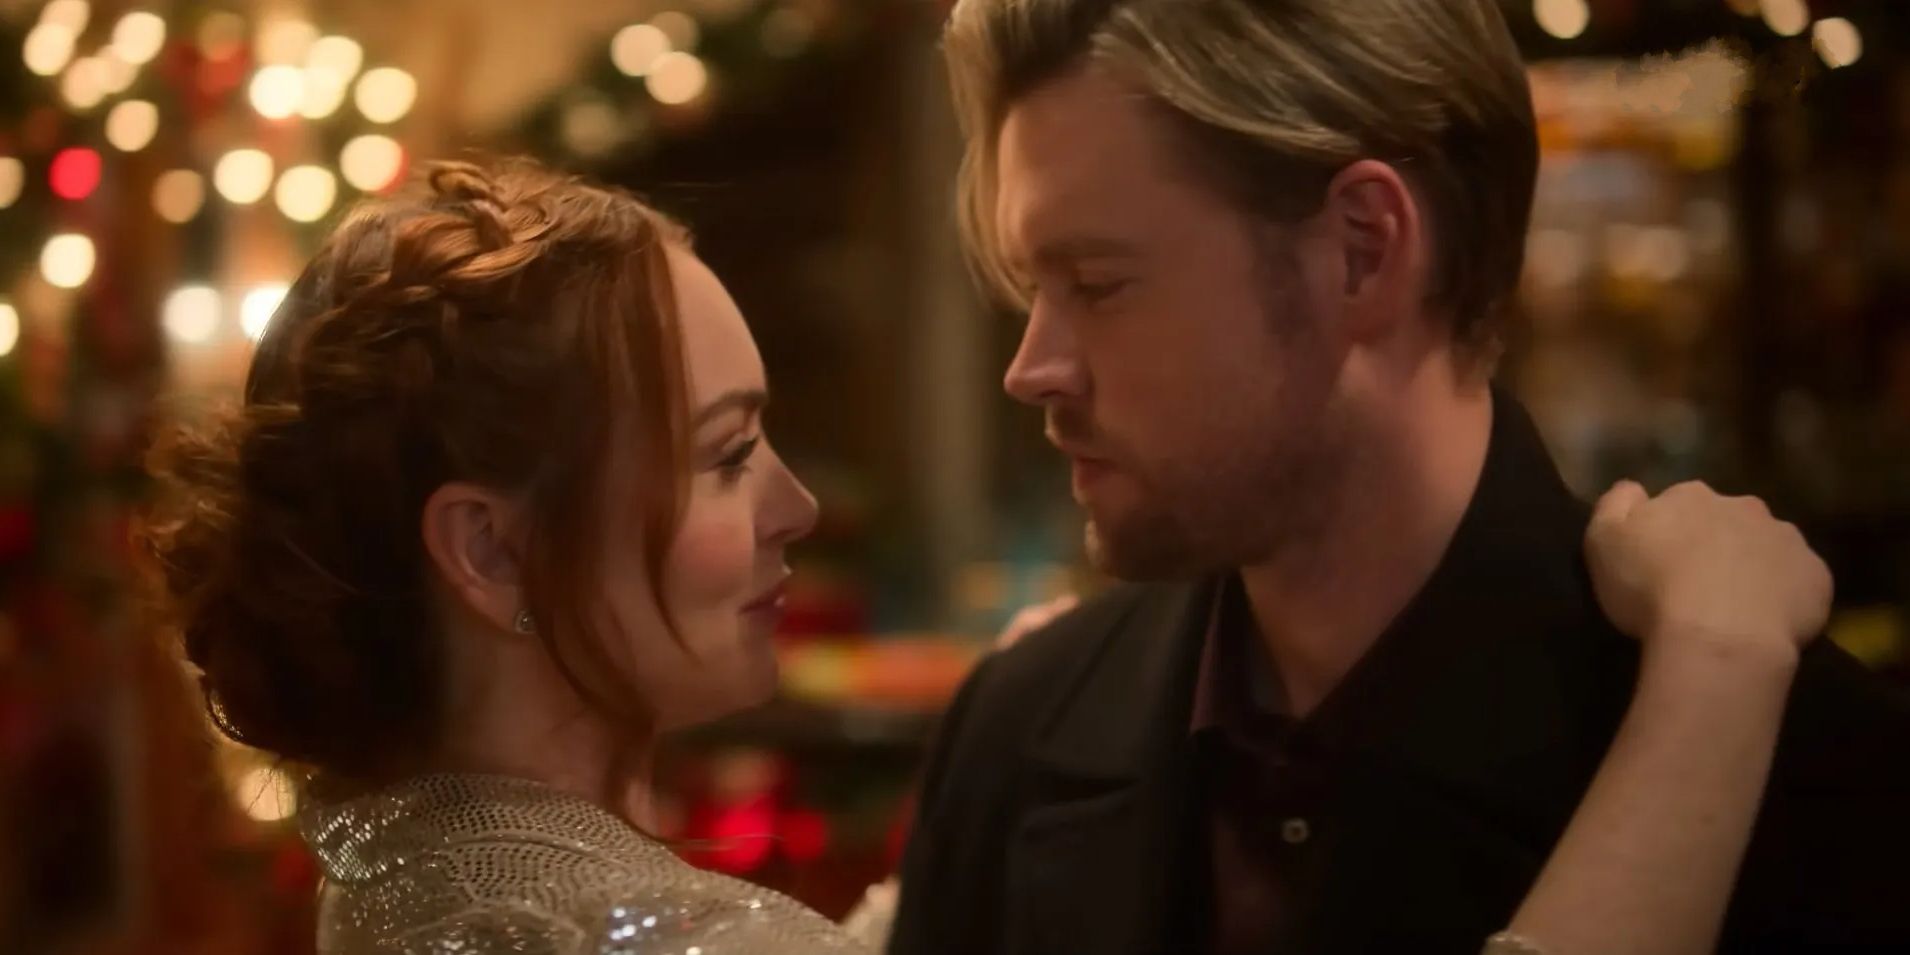 Lindsay Lohan and Chord Overstreet as Sierra and Jake dancing at the end of Netflix's Falling For Christmas